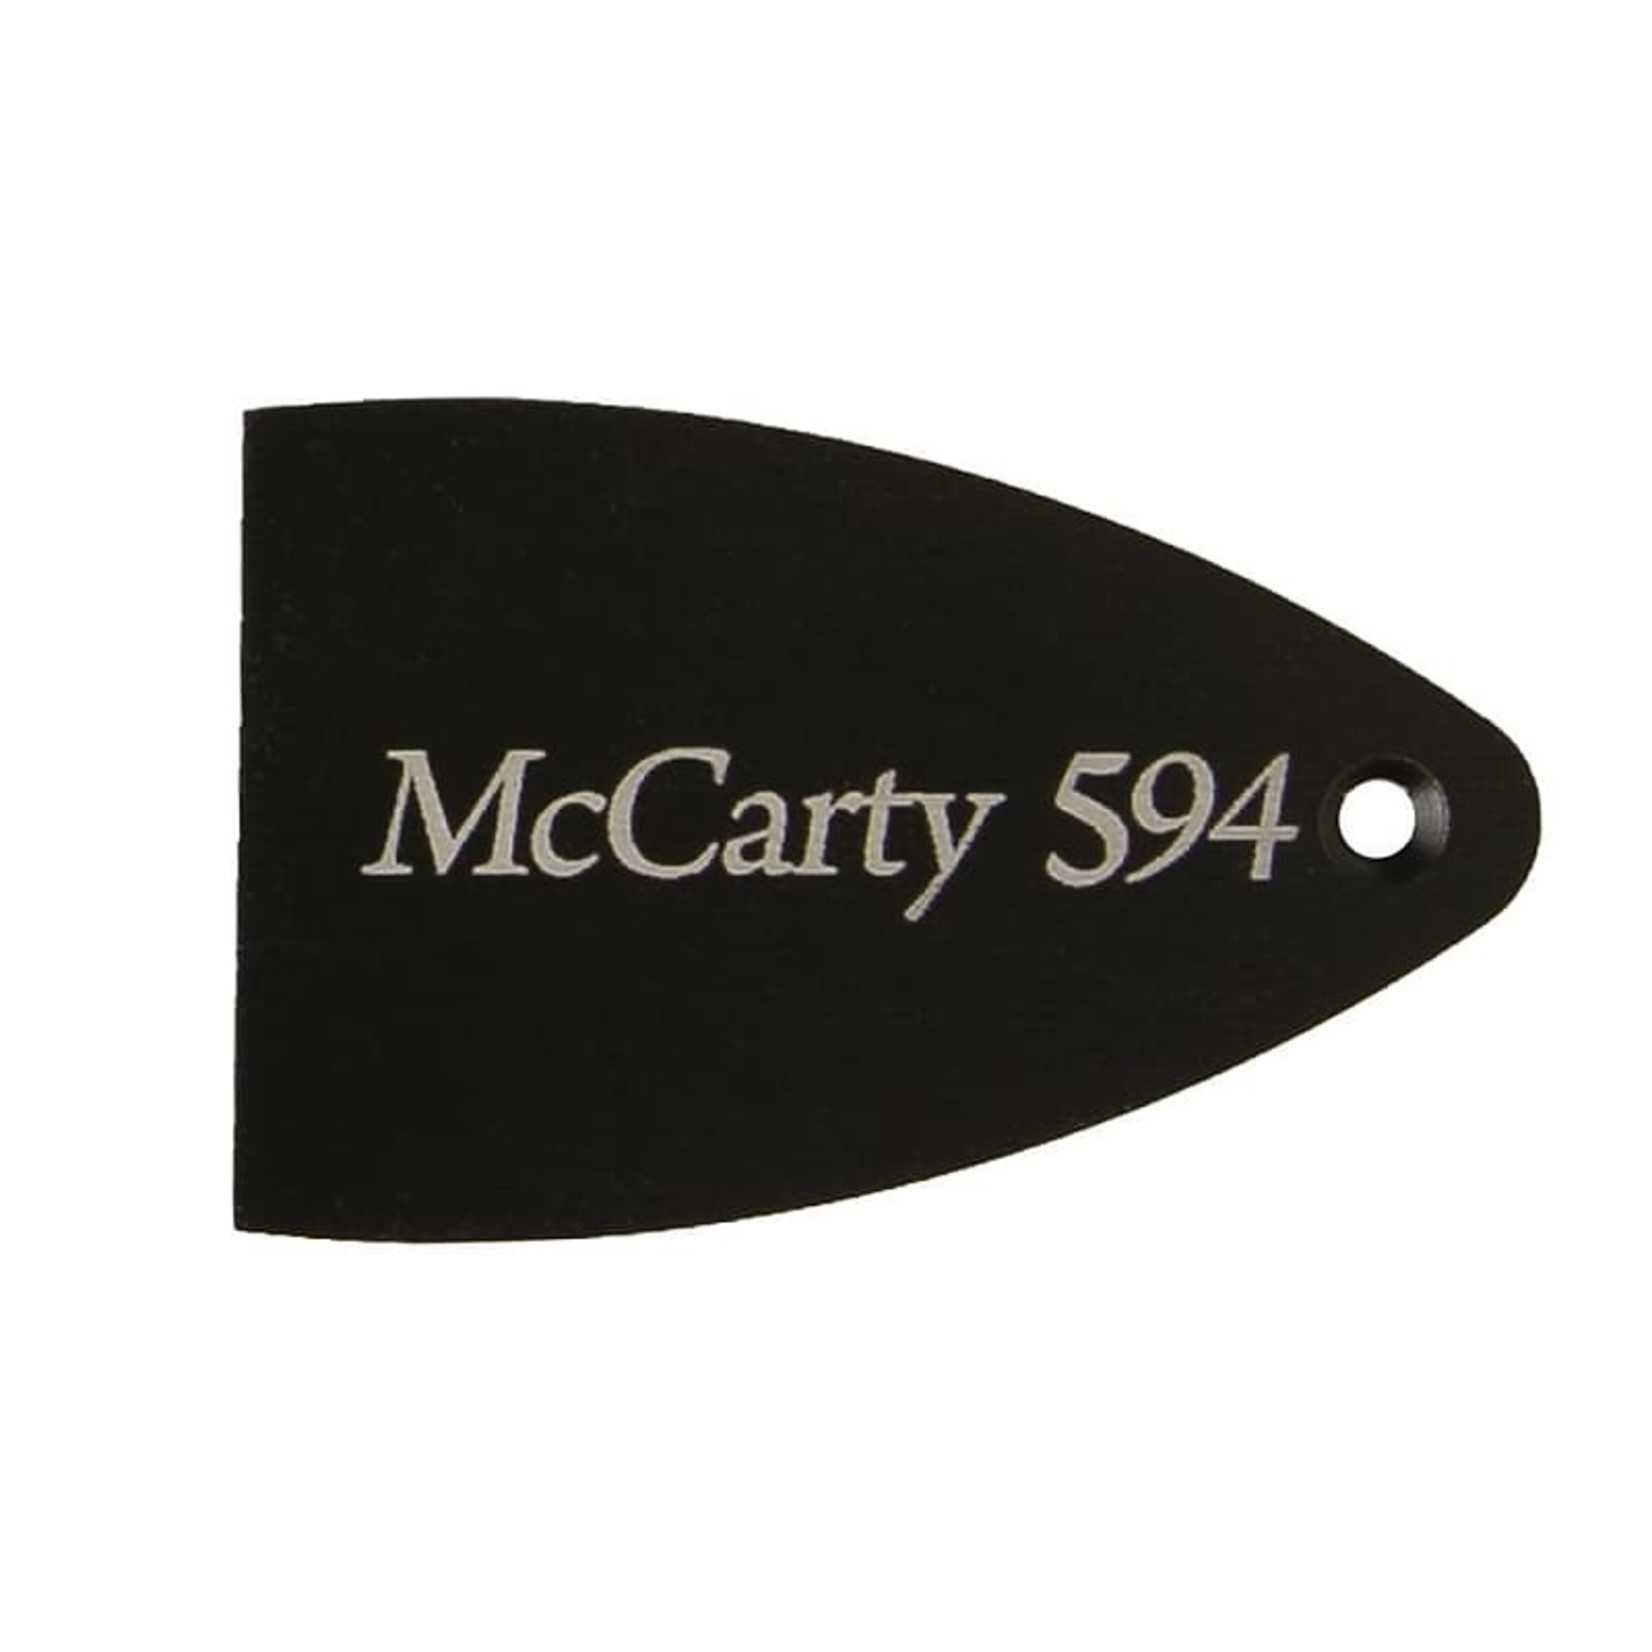 Paul Reed Smith Paul Reed Smith Core, Black Anodized Aluminum, Etched Truss Rod Cover - McCarty 594